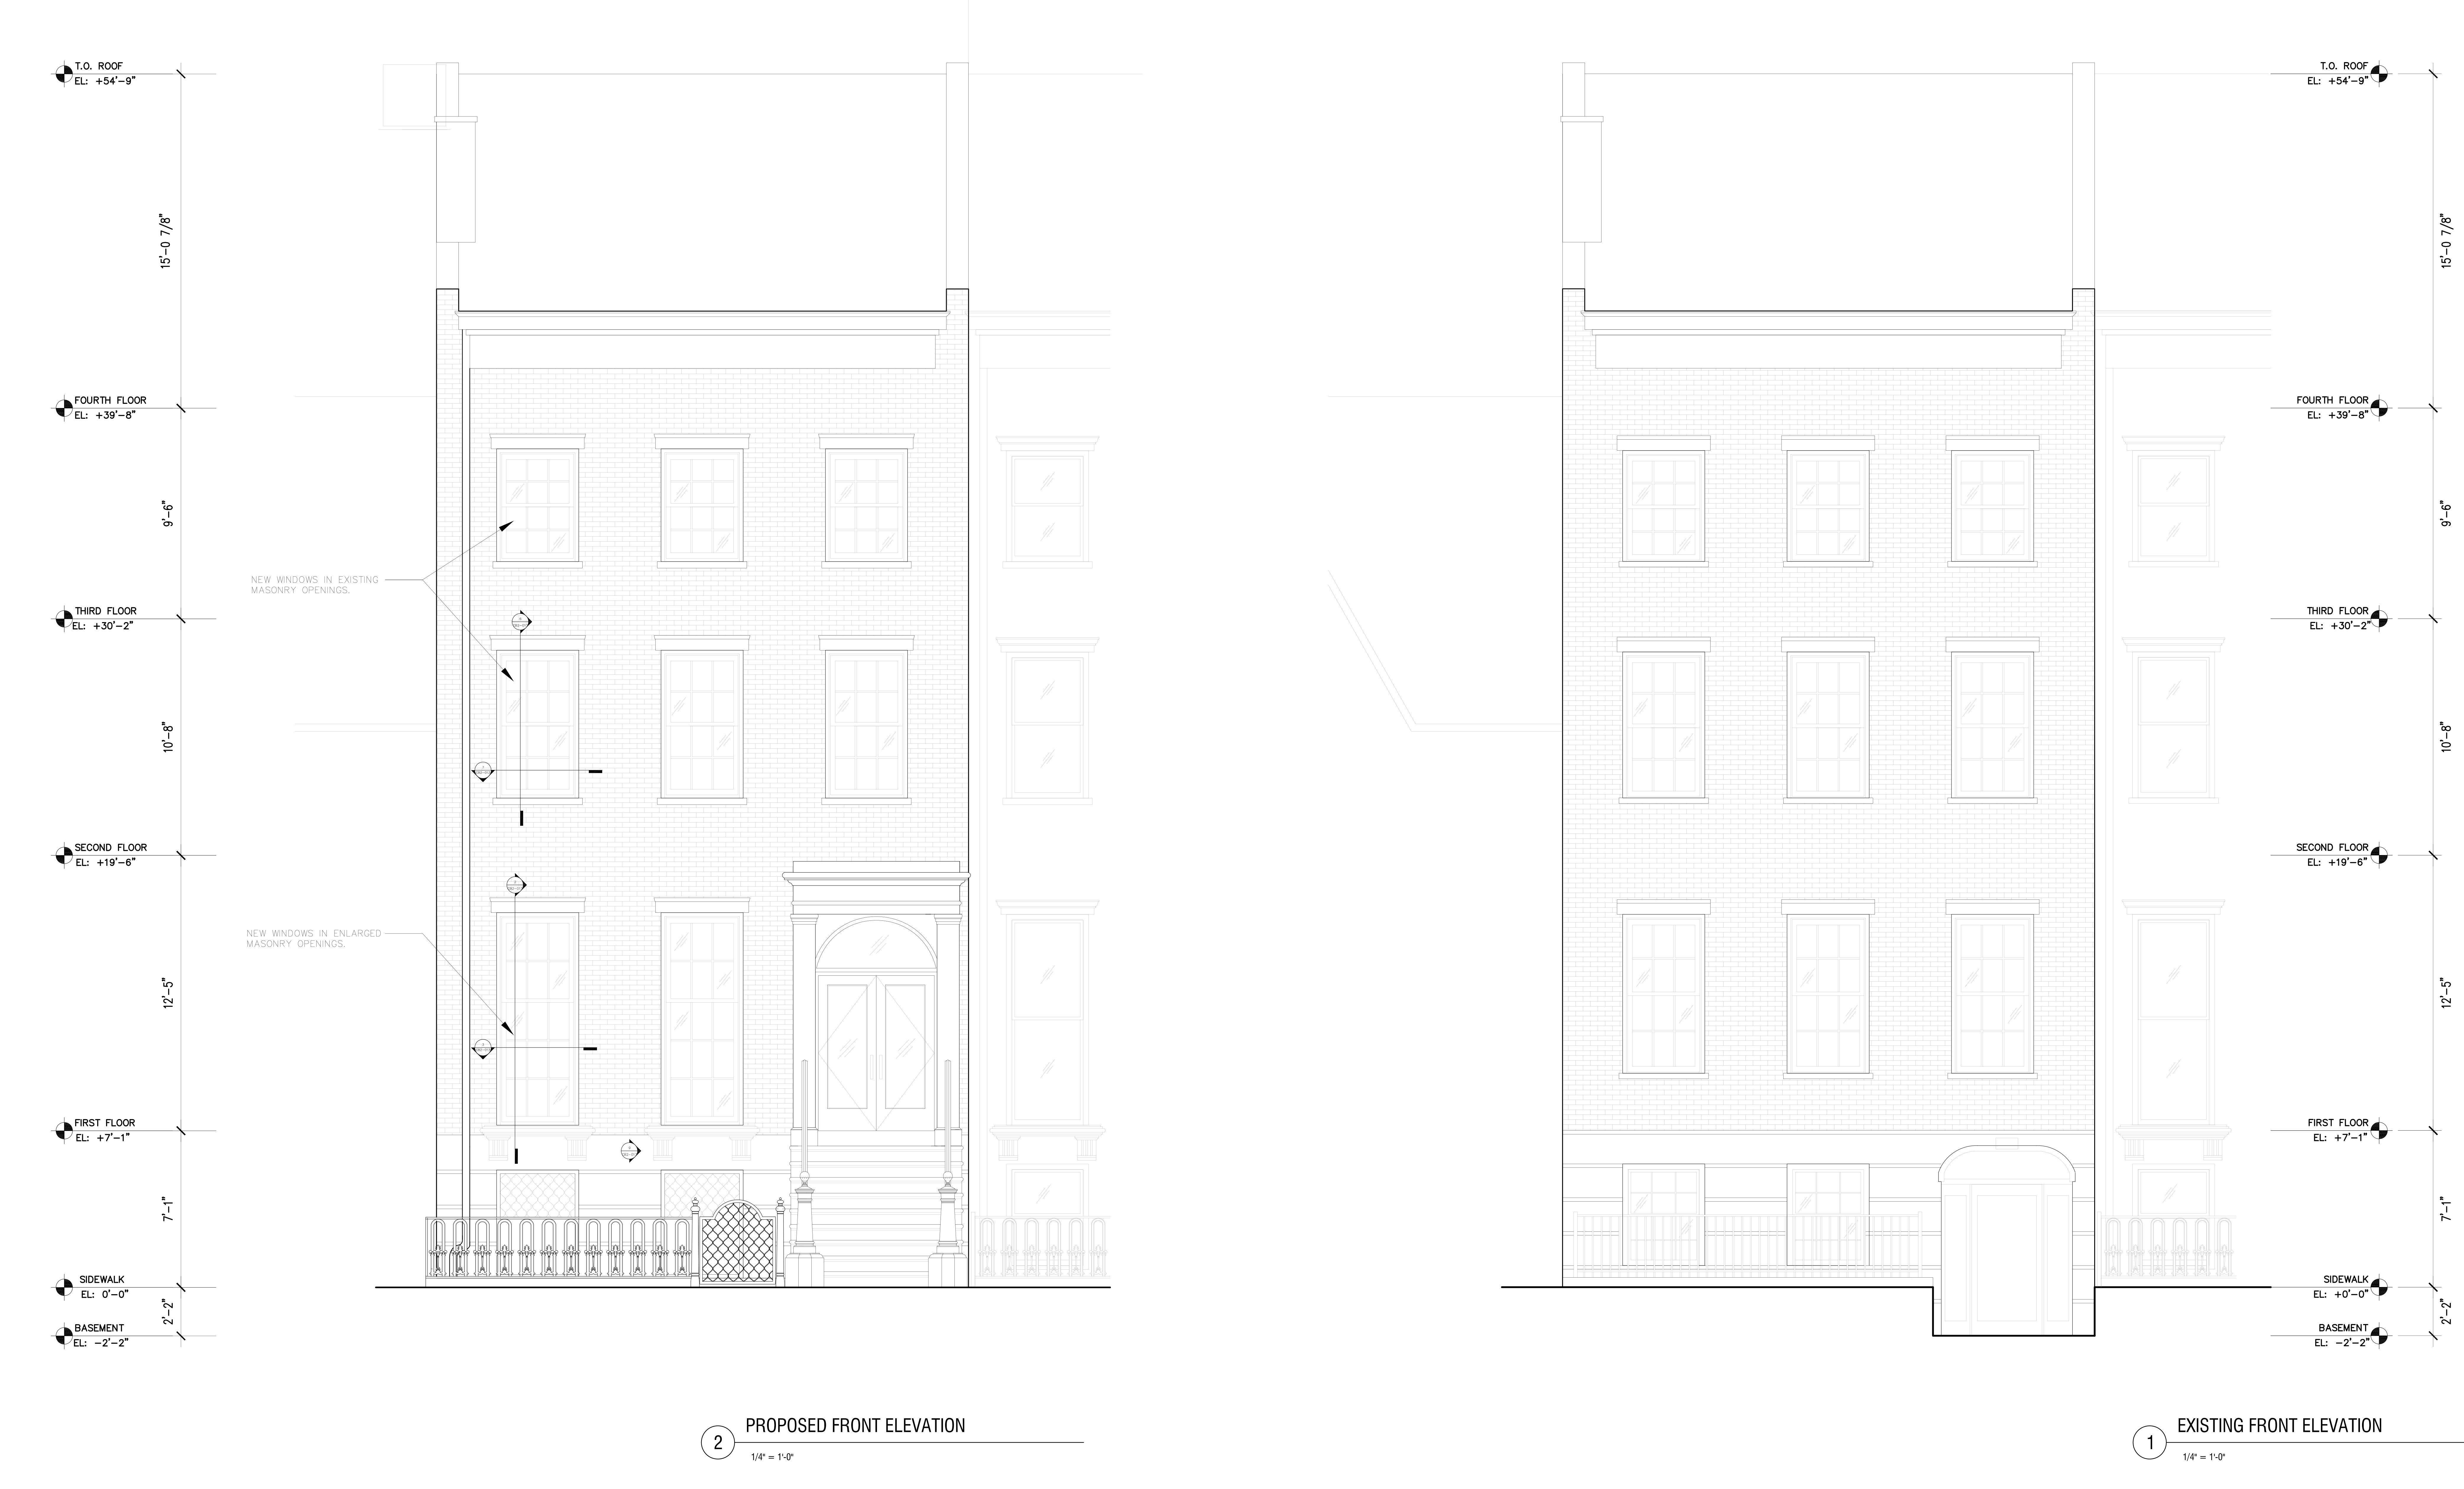 Proposal for the front of 152 Henry Street, as presented August 9, 2016